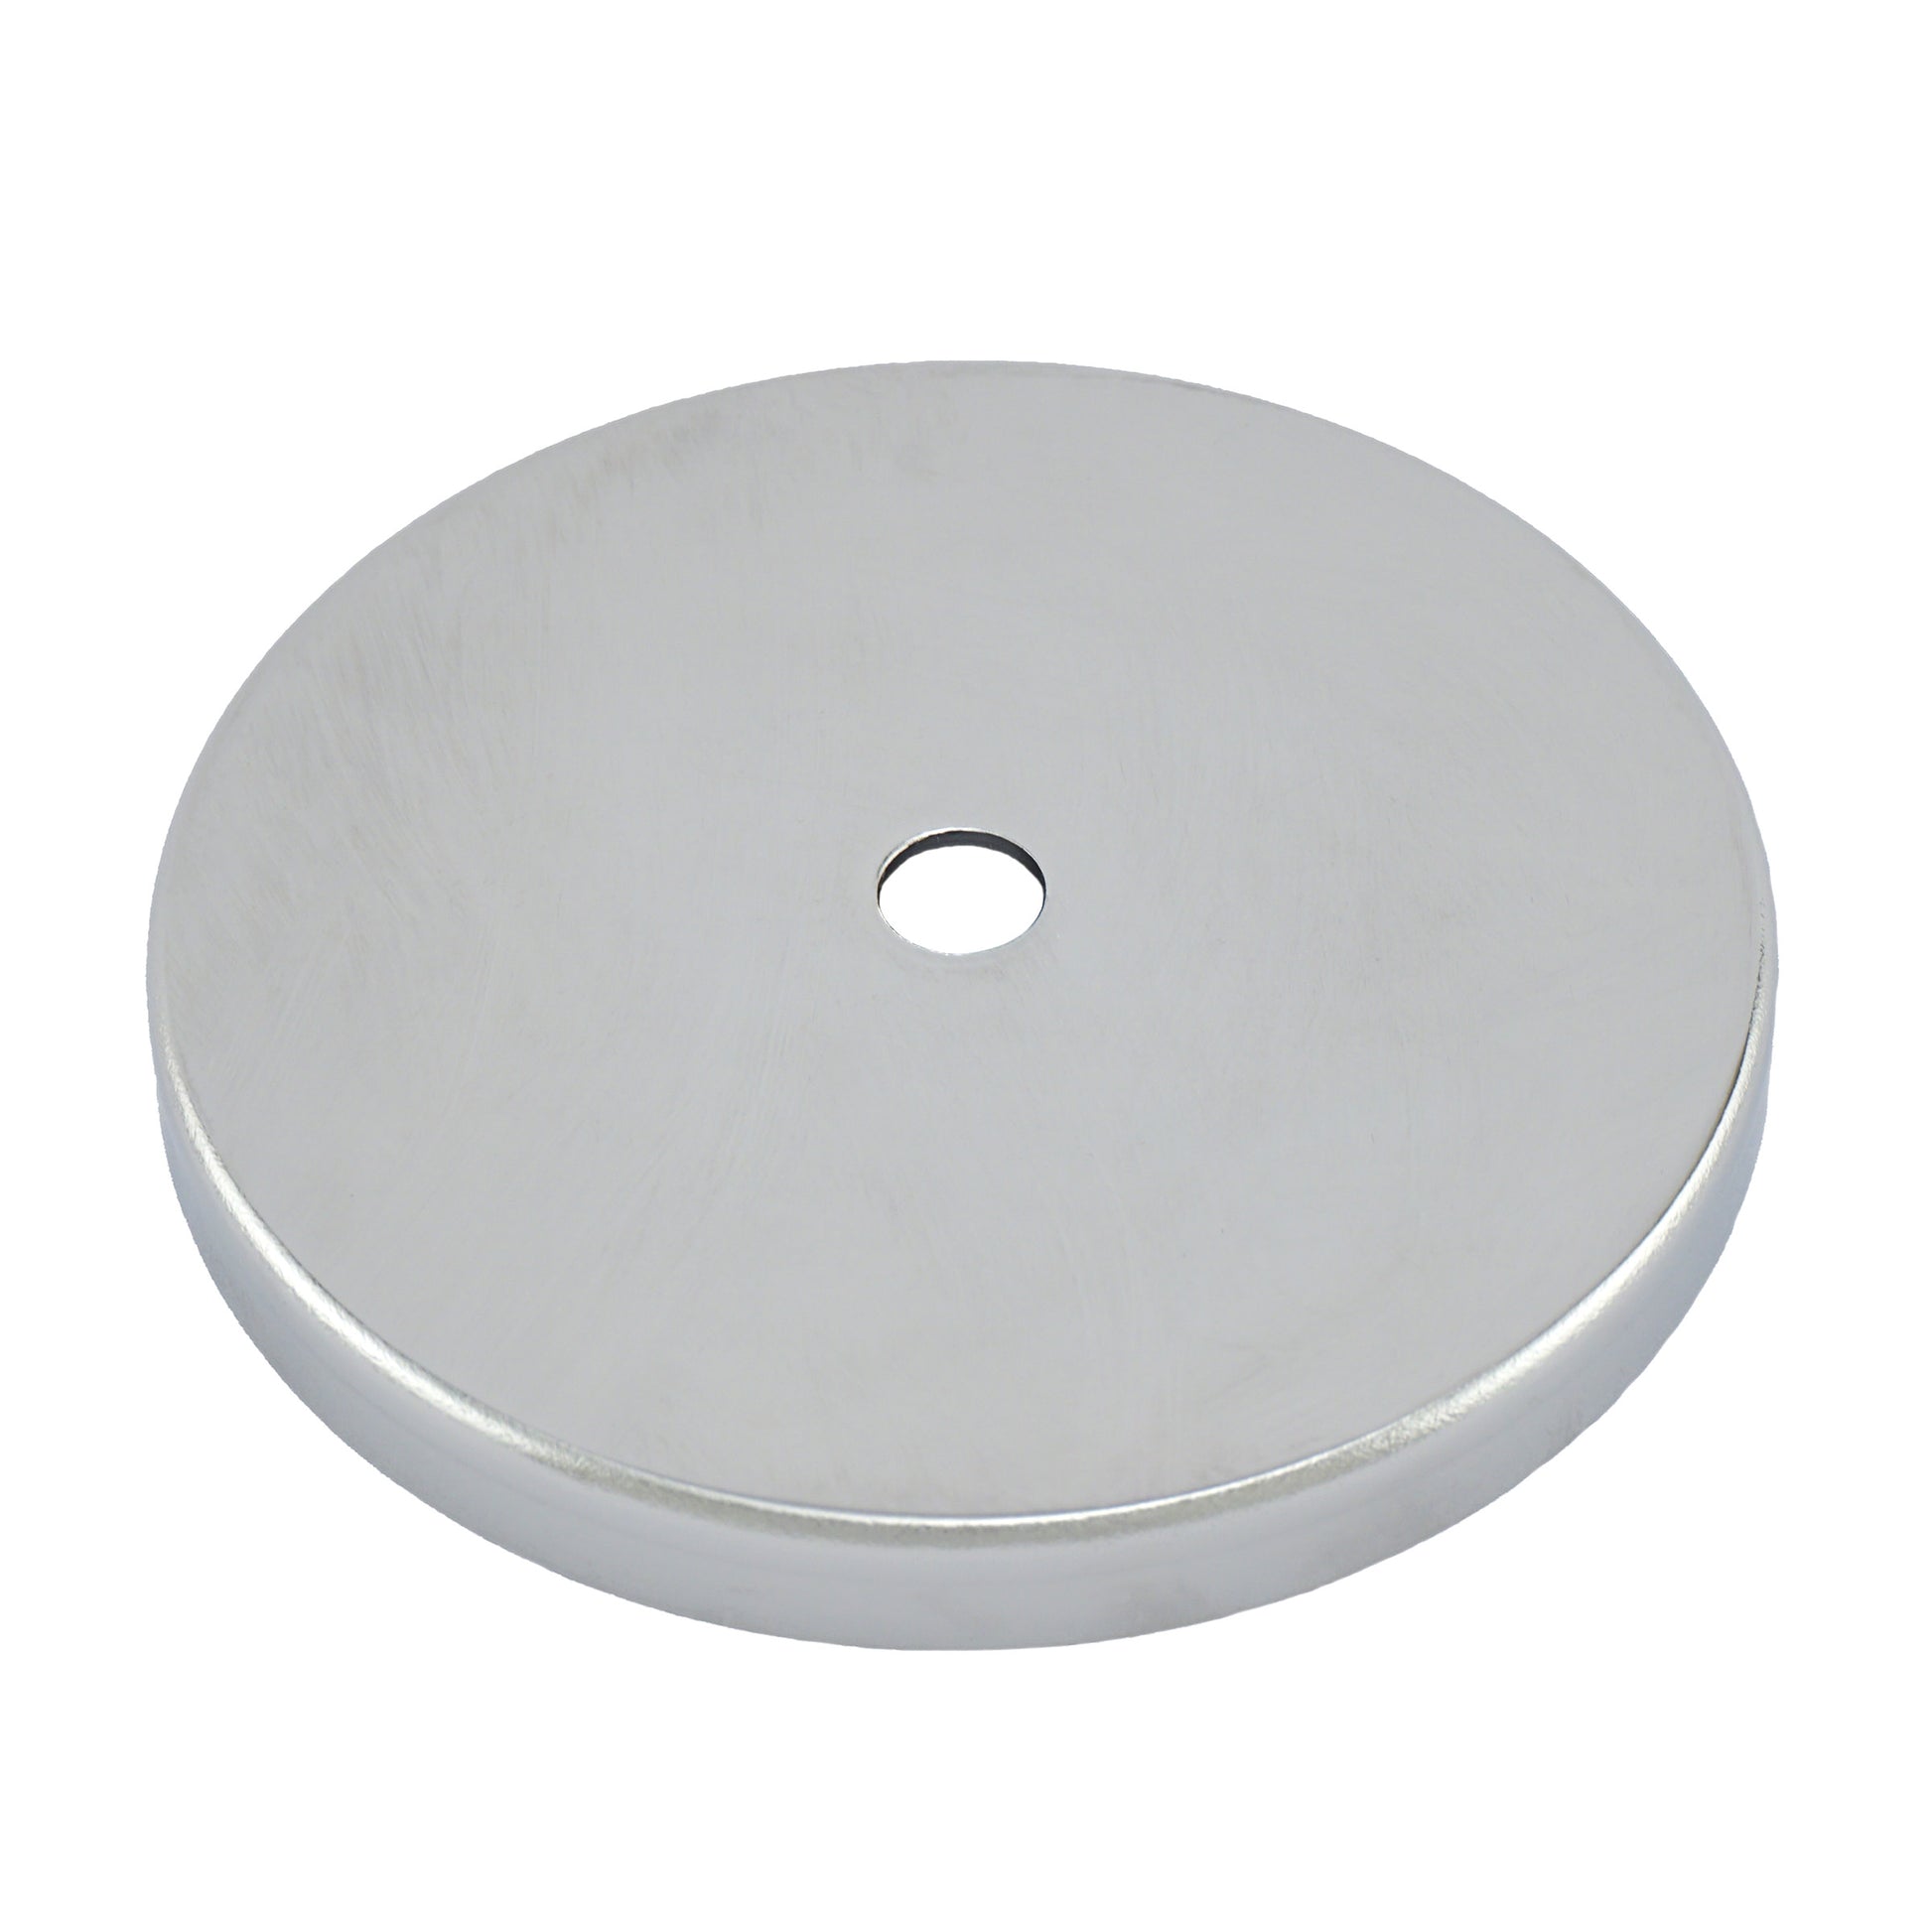 Load image into Gallery viewer, RB100CBX Heavy-Duty Ceramic Round Base Magnet - Front View